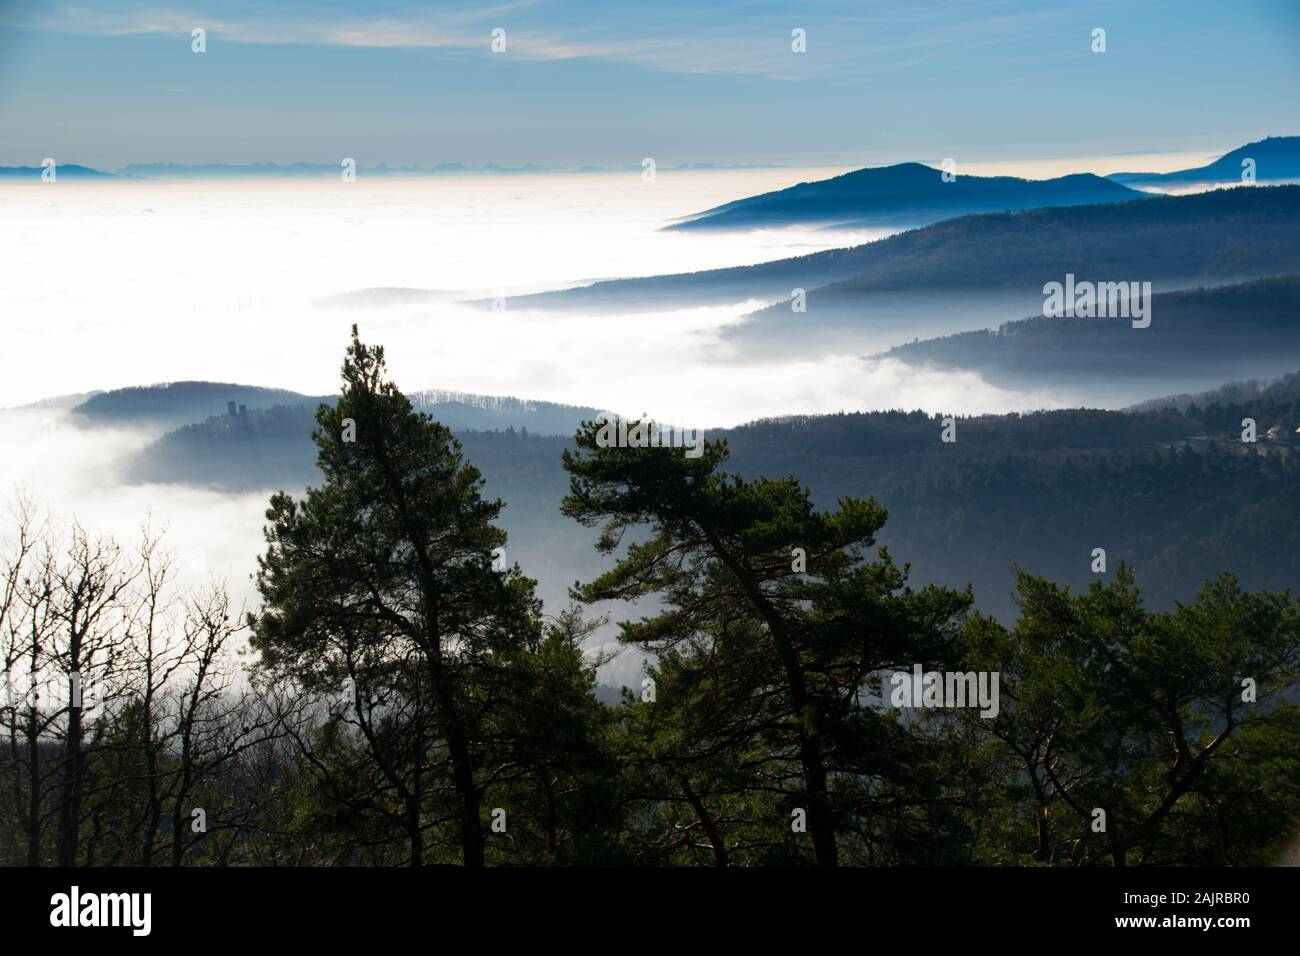 View to the Vosges mountains in Alsace in France on a foggy winter day Stock Photo